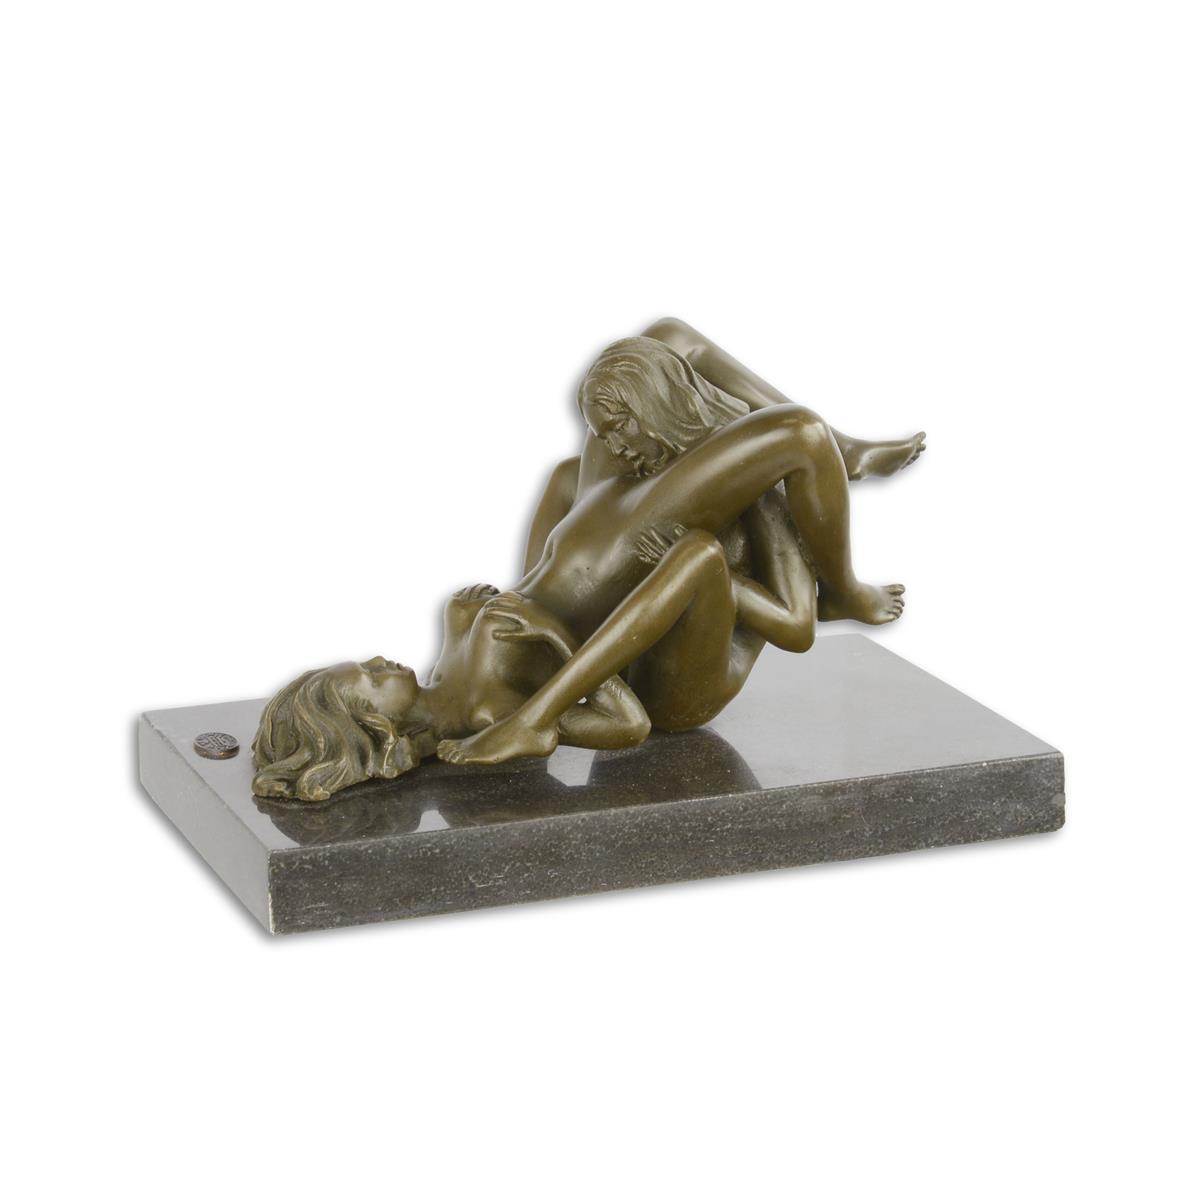 AN EROTIC BRONZE SCULPTURE OF TWO FEMALE NUDES DOING ORAL